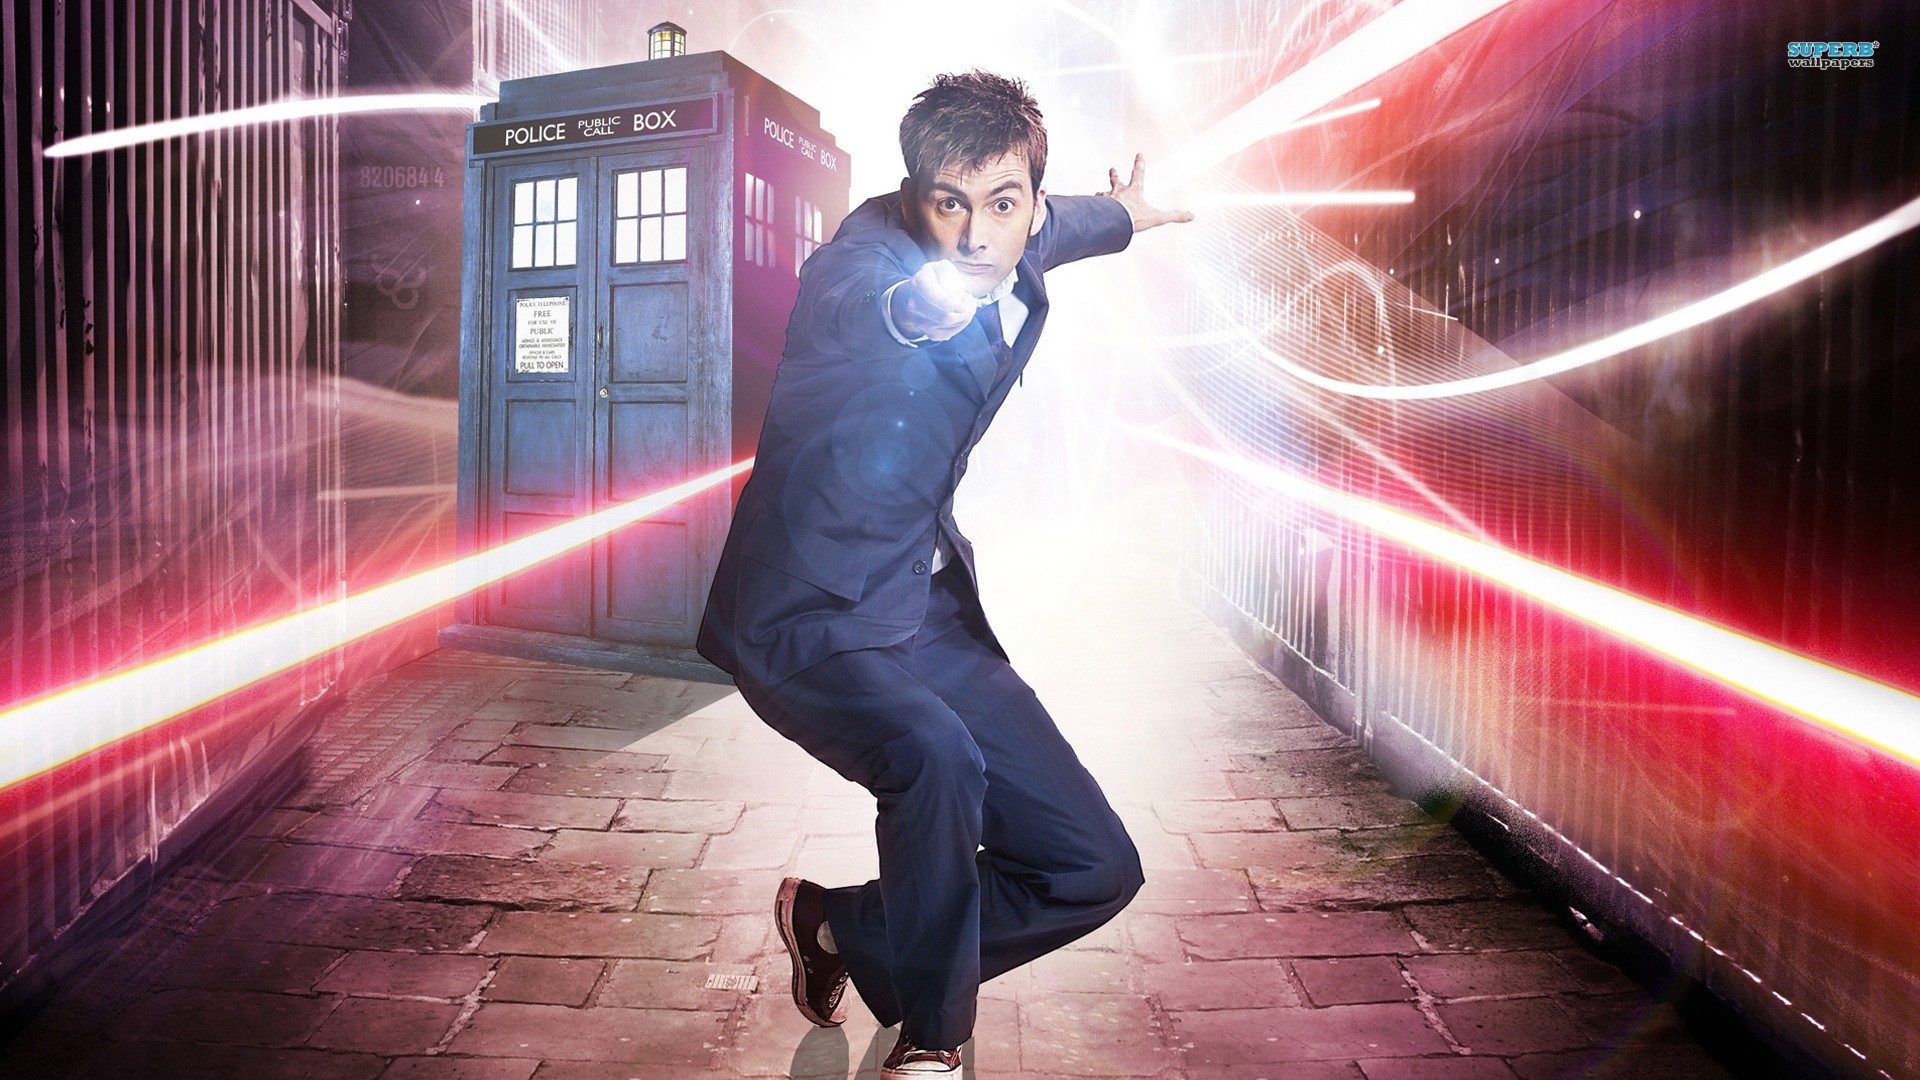 Doctor Who, The Doctor, TARDIS, David Tennant, Tenth Doctor Wallpaper